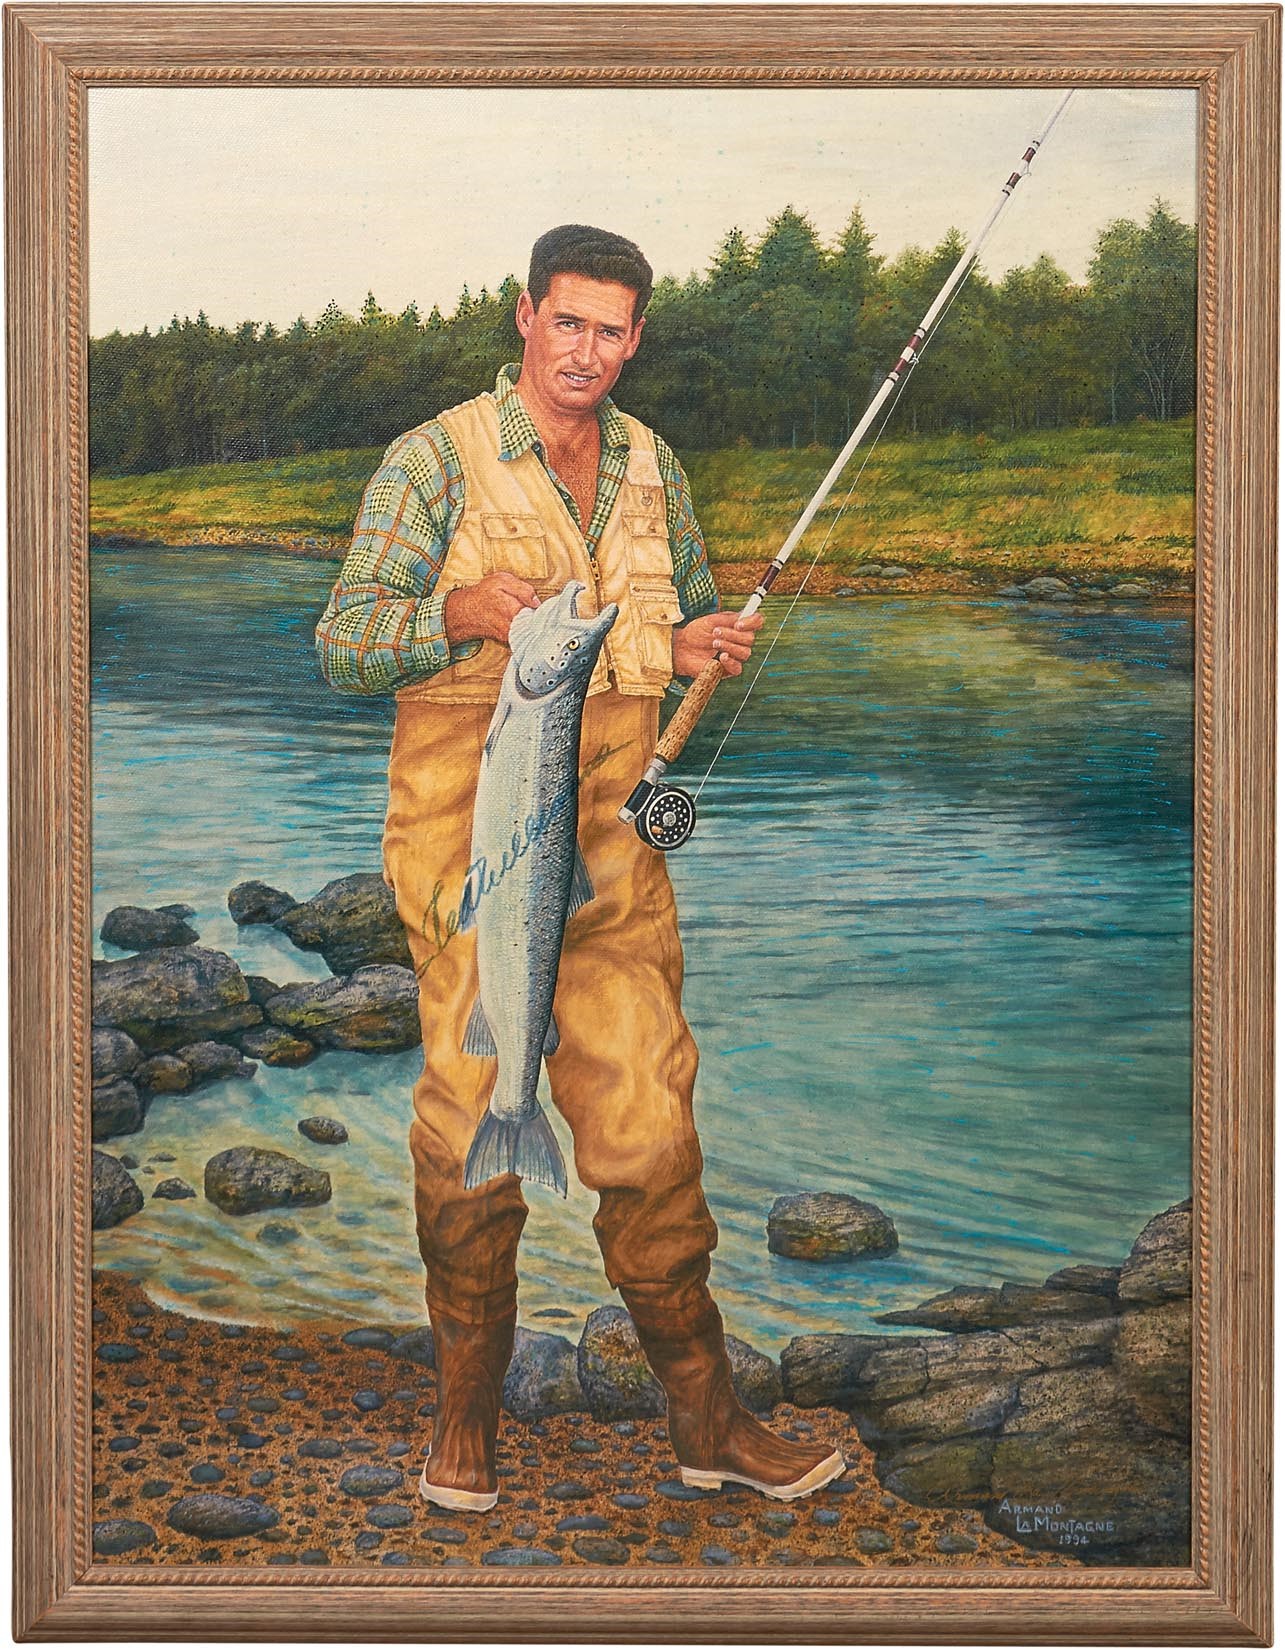 - Ted Williams Fly Fishing Collection w/Used Rod, Reel and Artwork